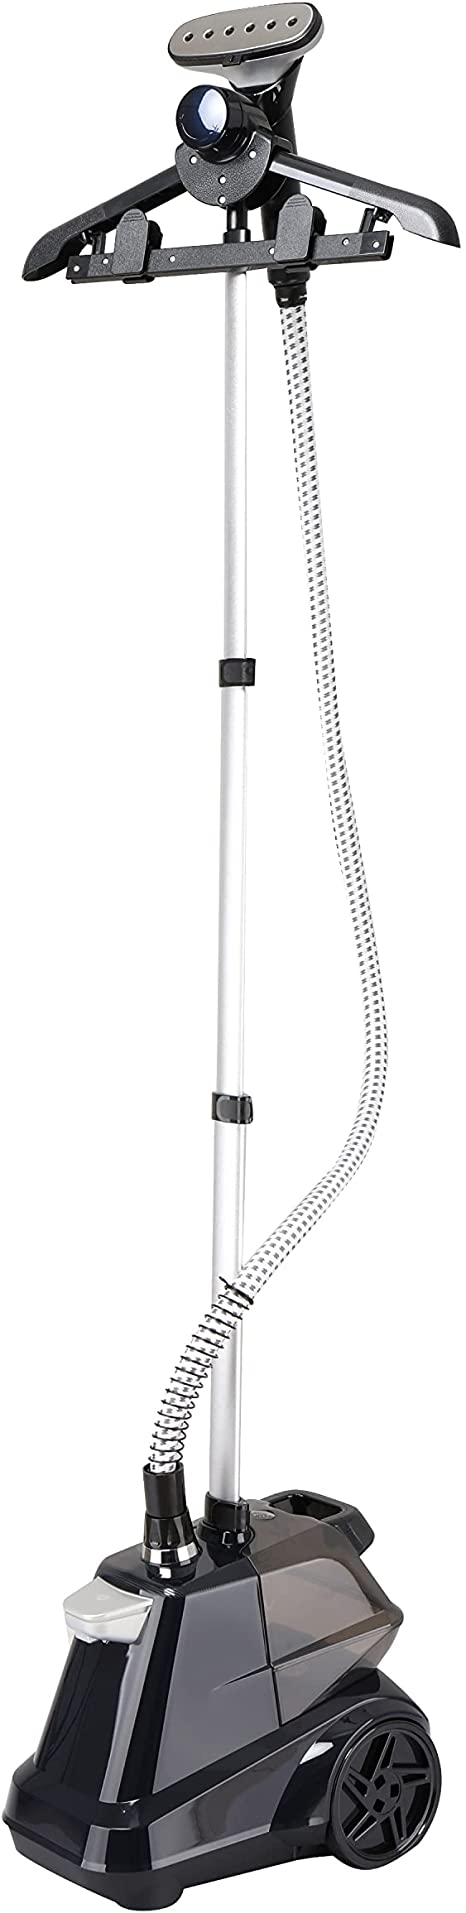 SALAV X3A Commercial Full-Size Garment Steamer with Foot Pedals and Extra Large 3L Water Tank, 1800 watts (navy)